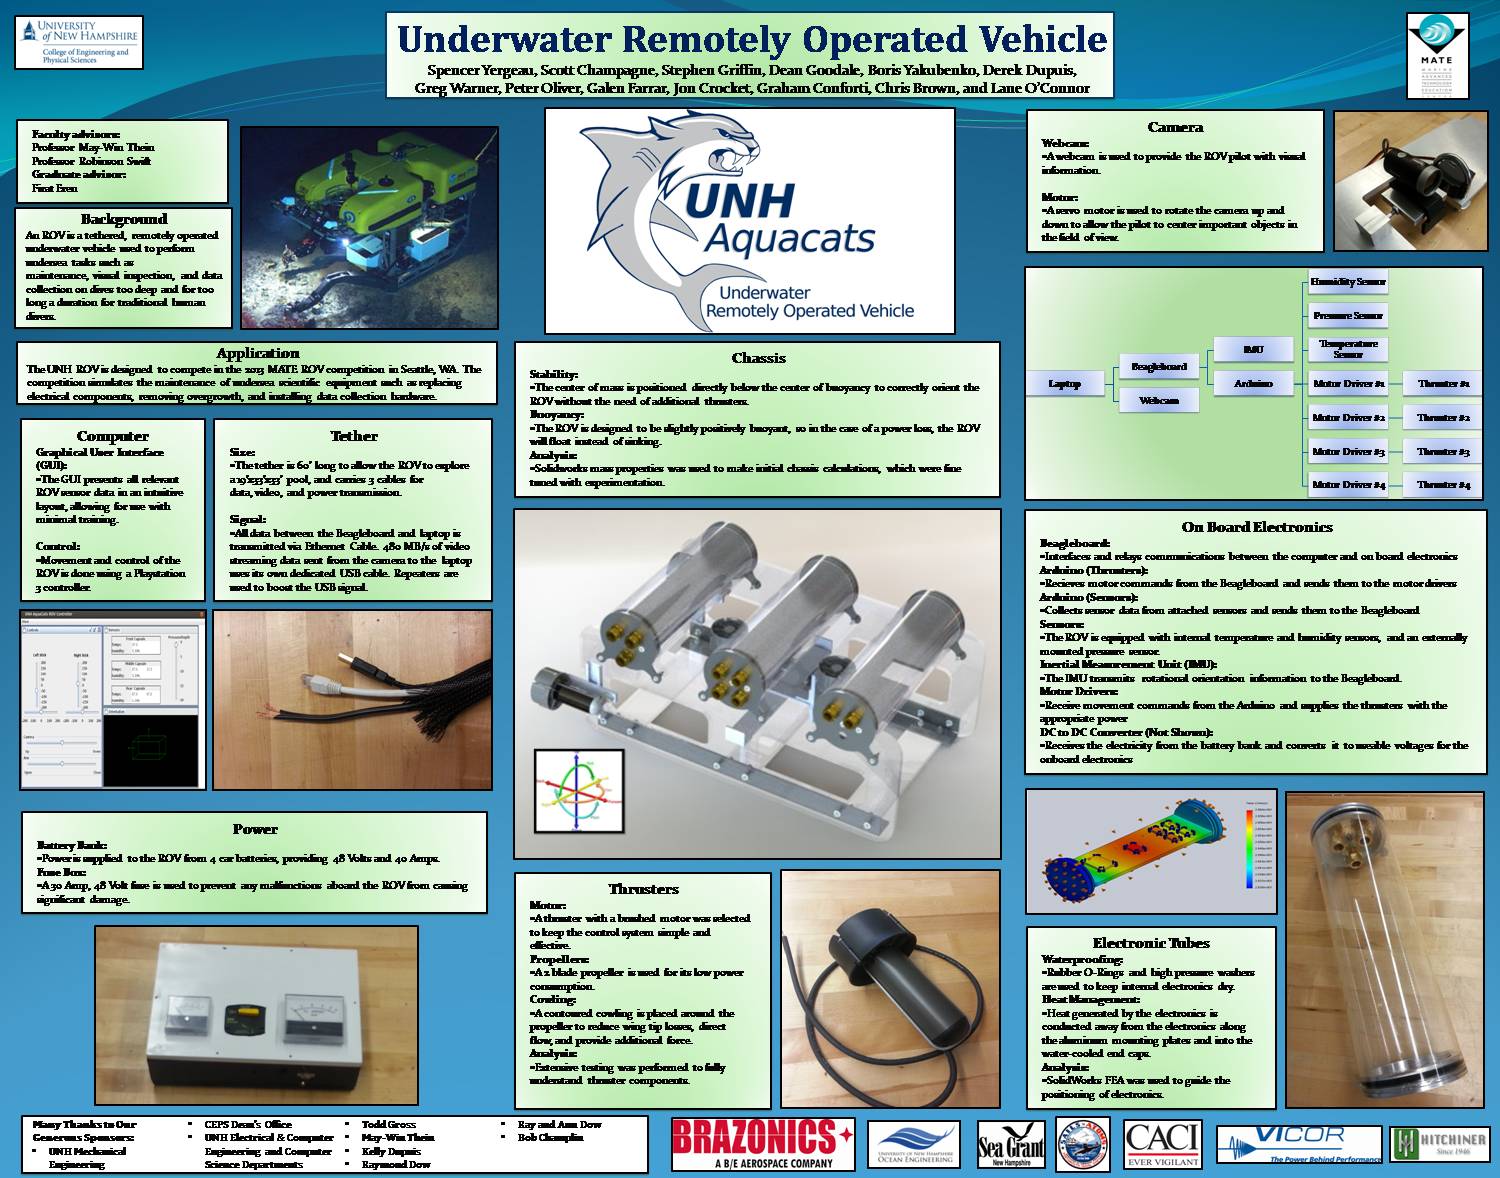 Underwater Remotely Operated Vehicle by sjk52